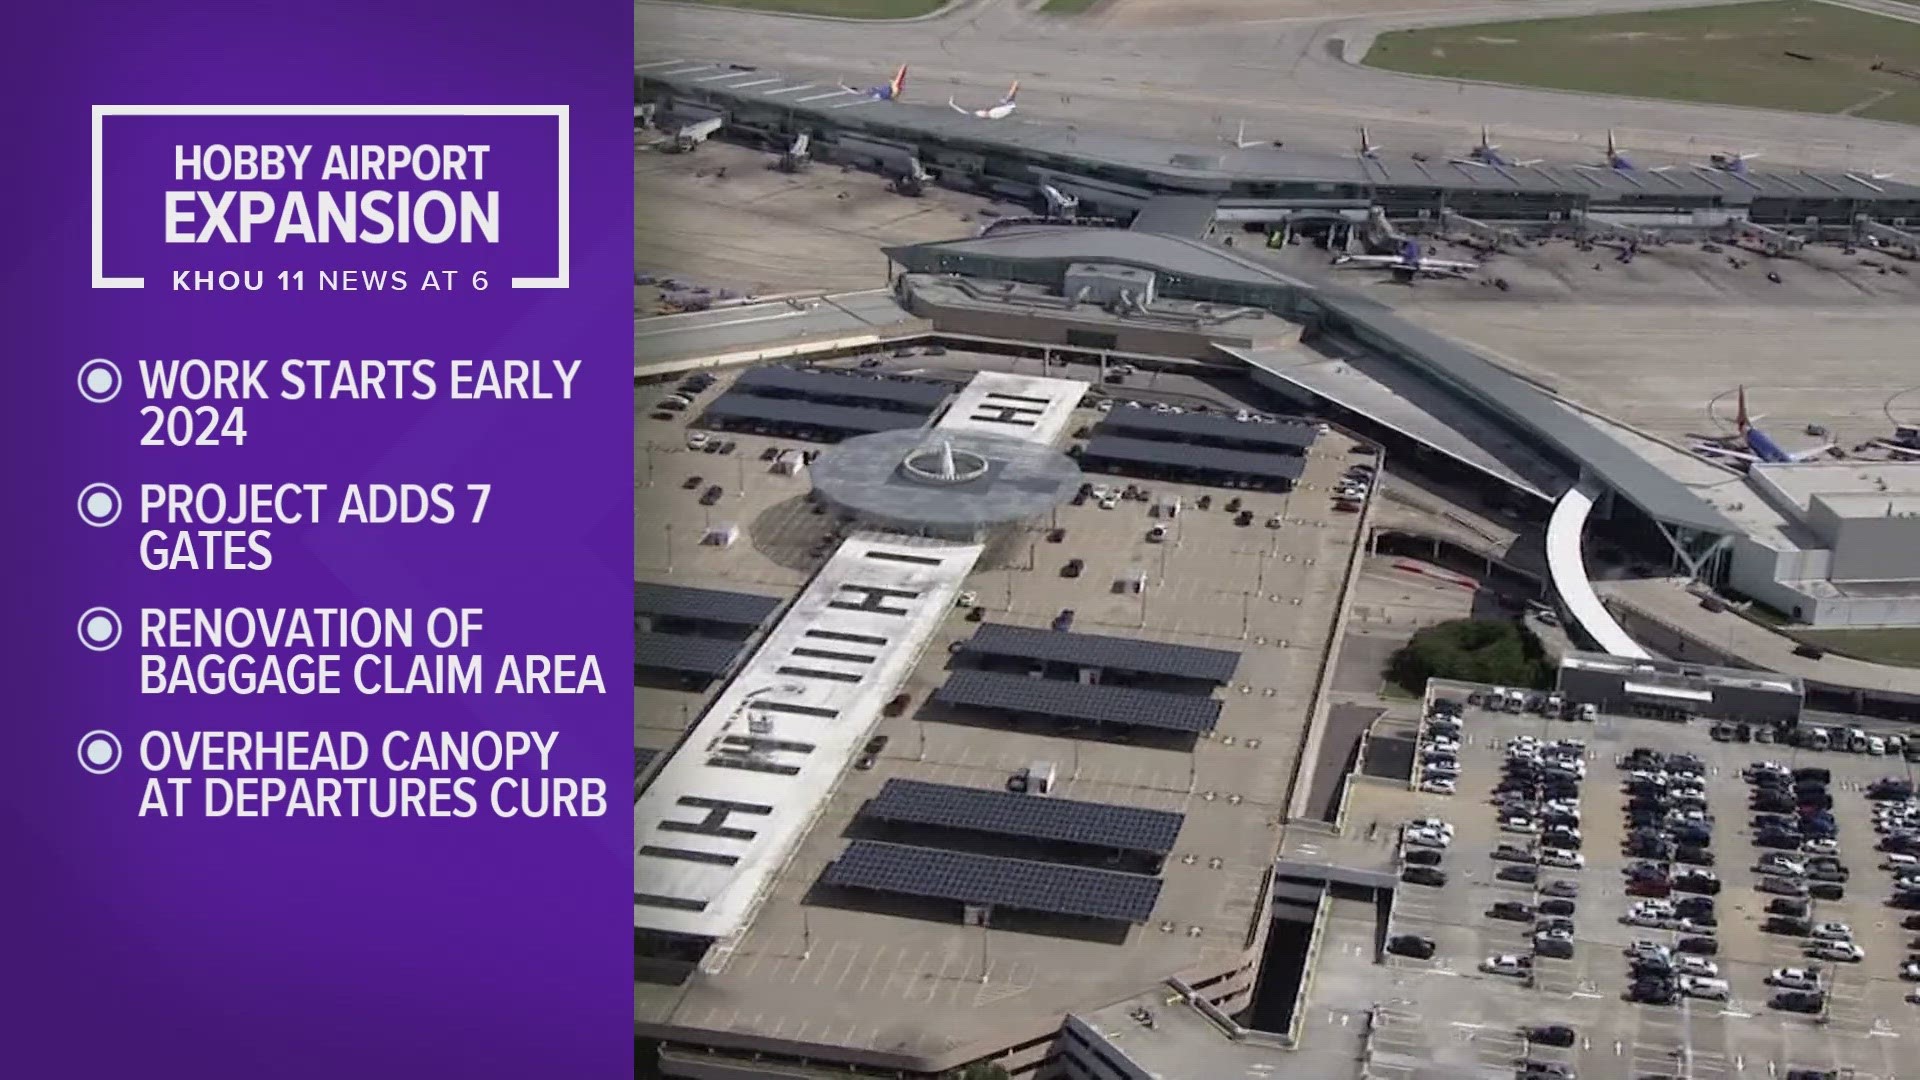 Some new changes are coming to Hobby Airport's West Concourse after Houston City Council unanimously approved the first installment of the airport's expansion plans.